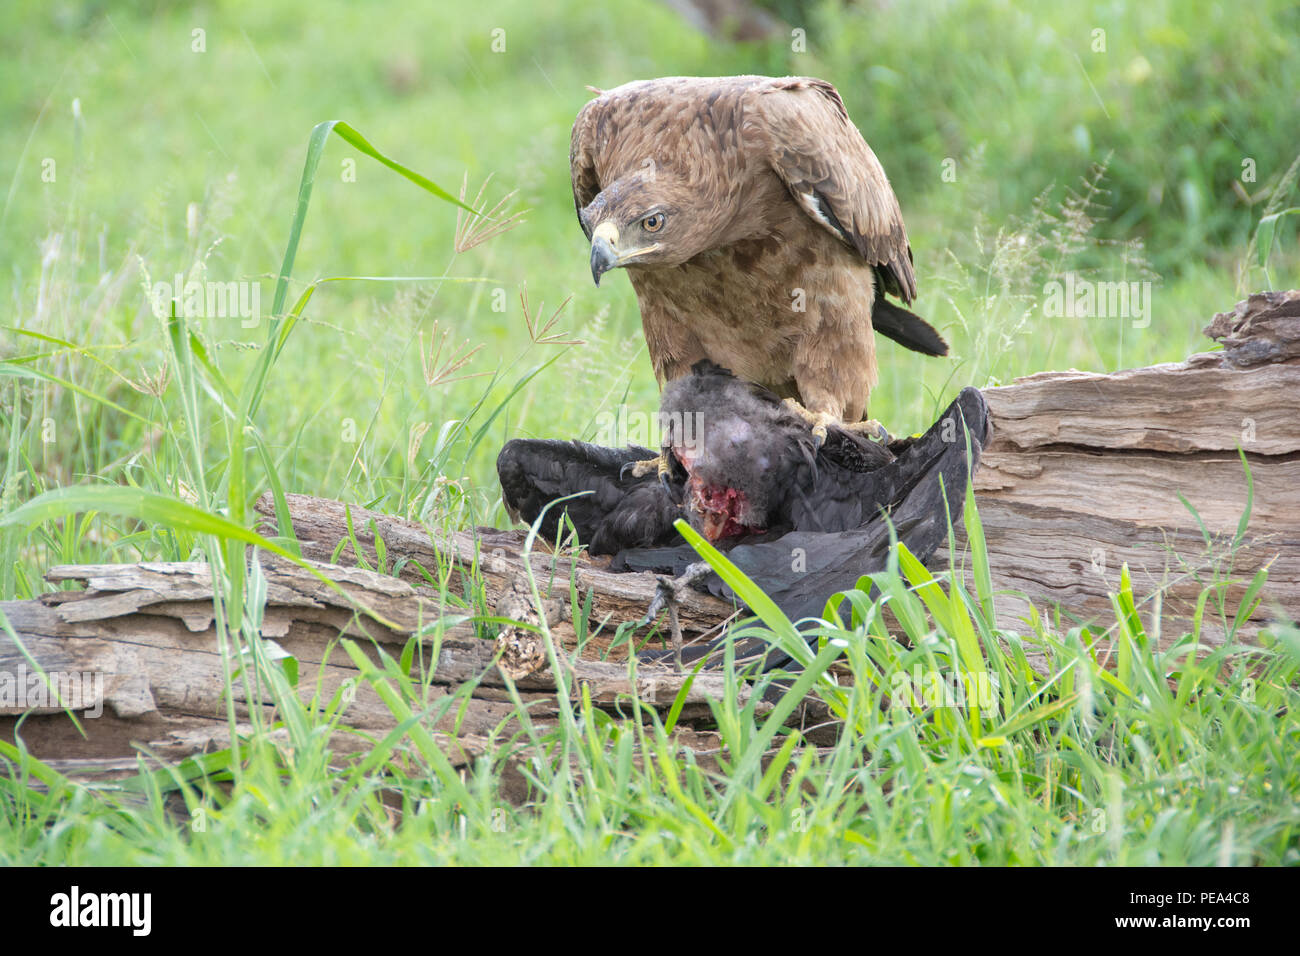 An African Crowned Eagle feeding on another bird in Serengeti National Park, Tanzania. Stock Photo